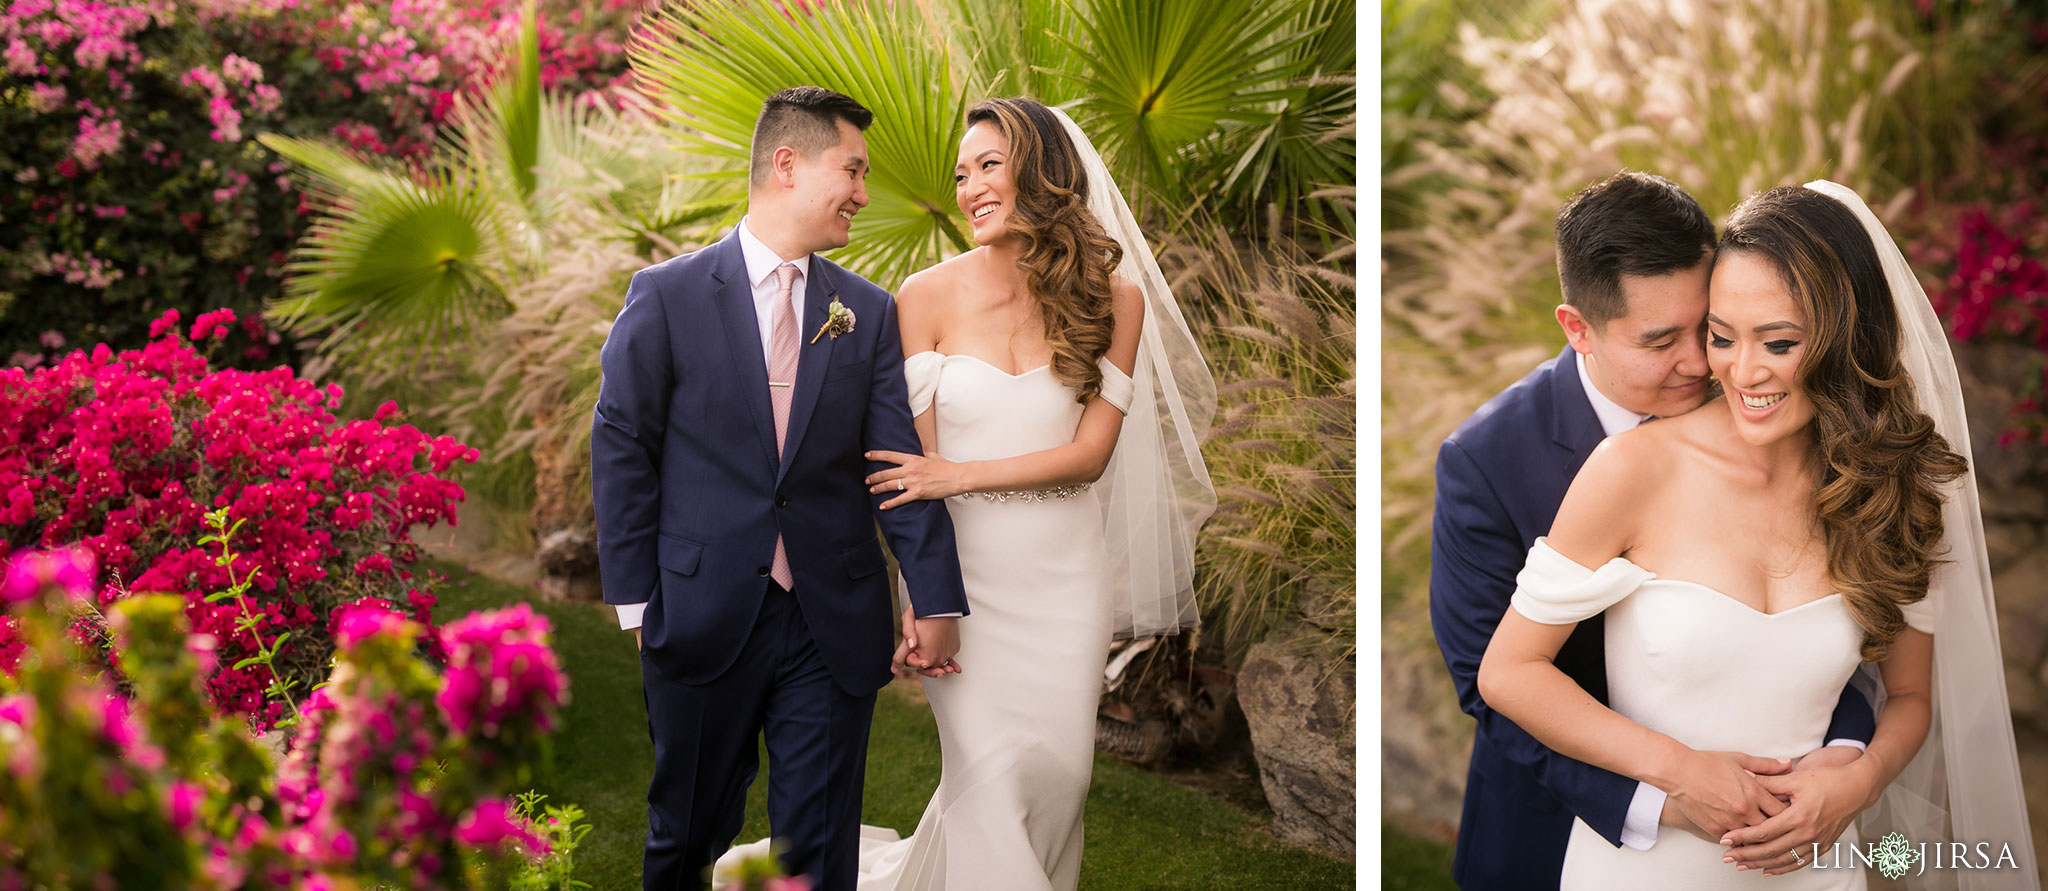 22 odonnell house palm springs wedding photography